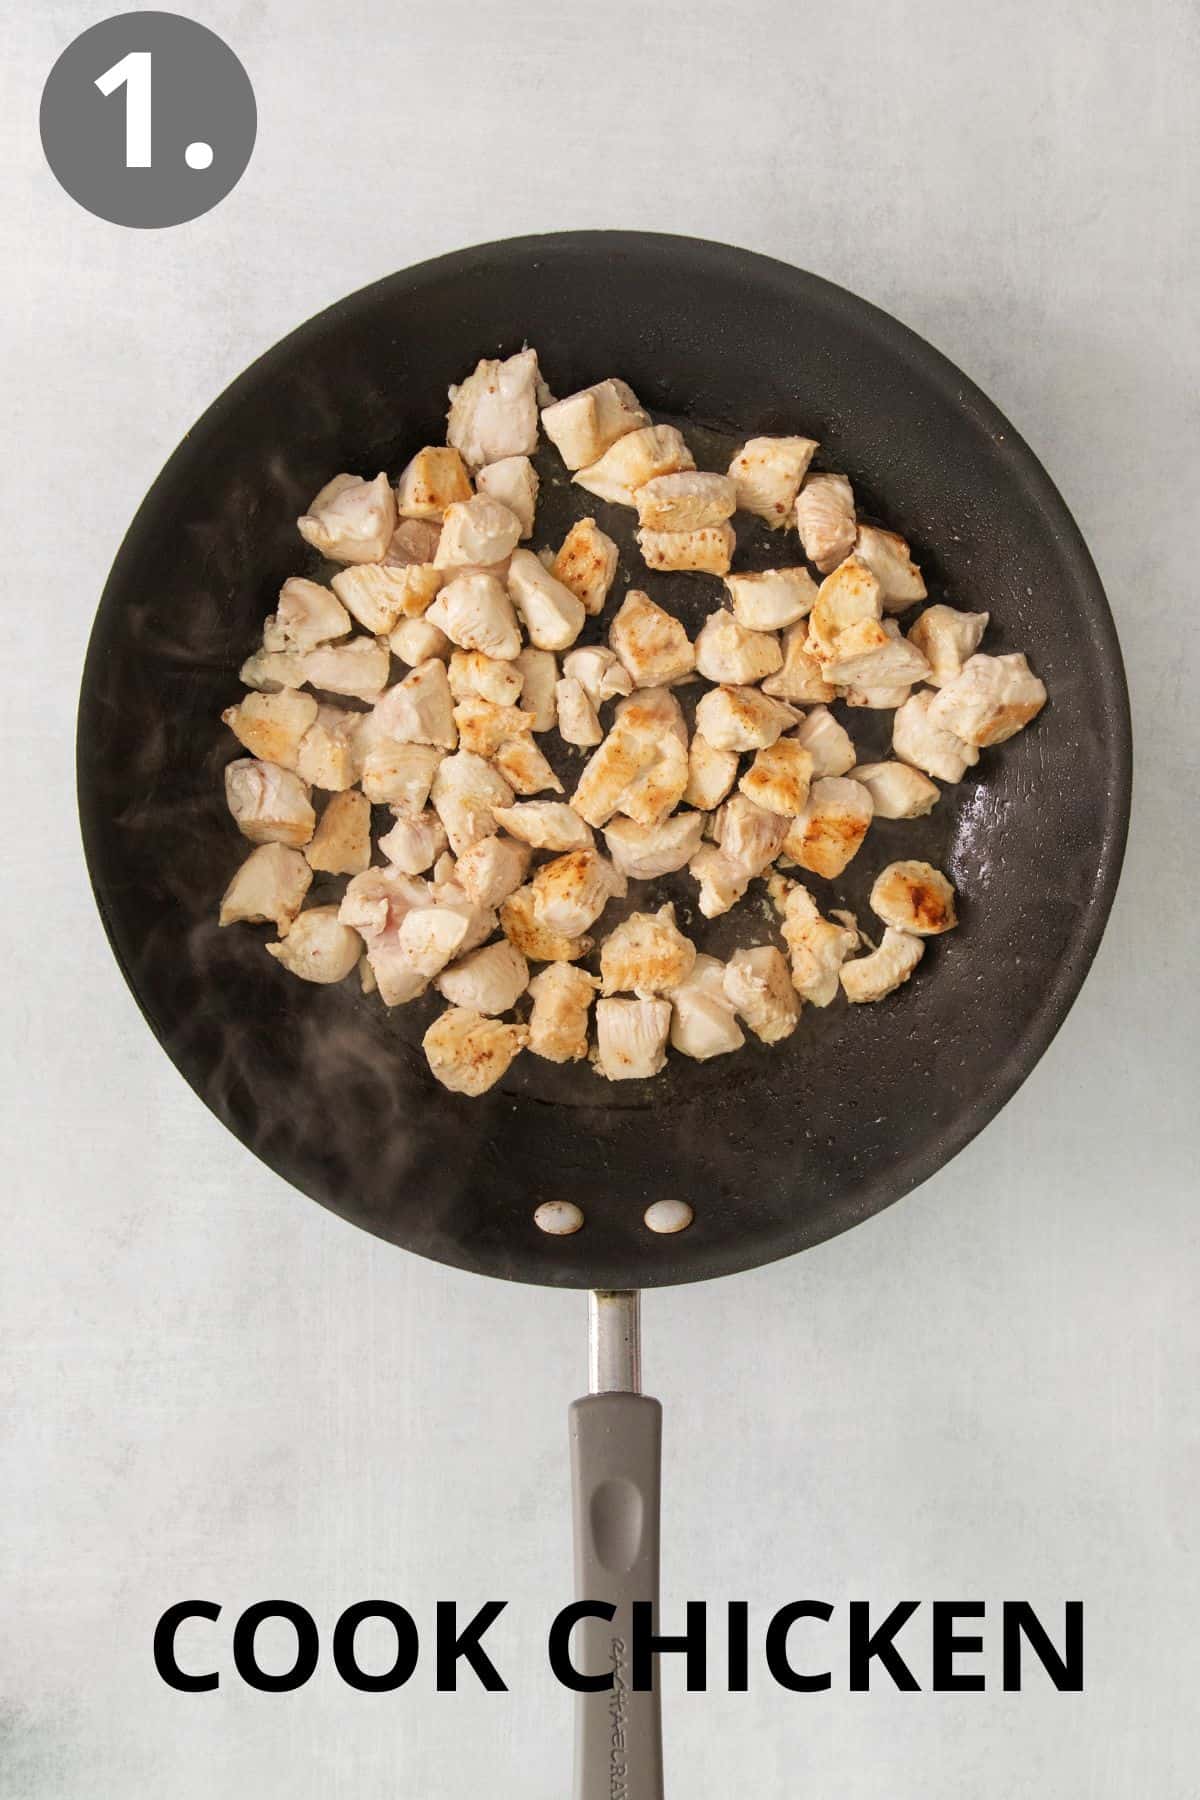 Pieces of chicken cooking in a skillet